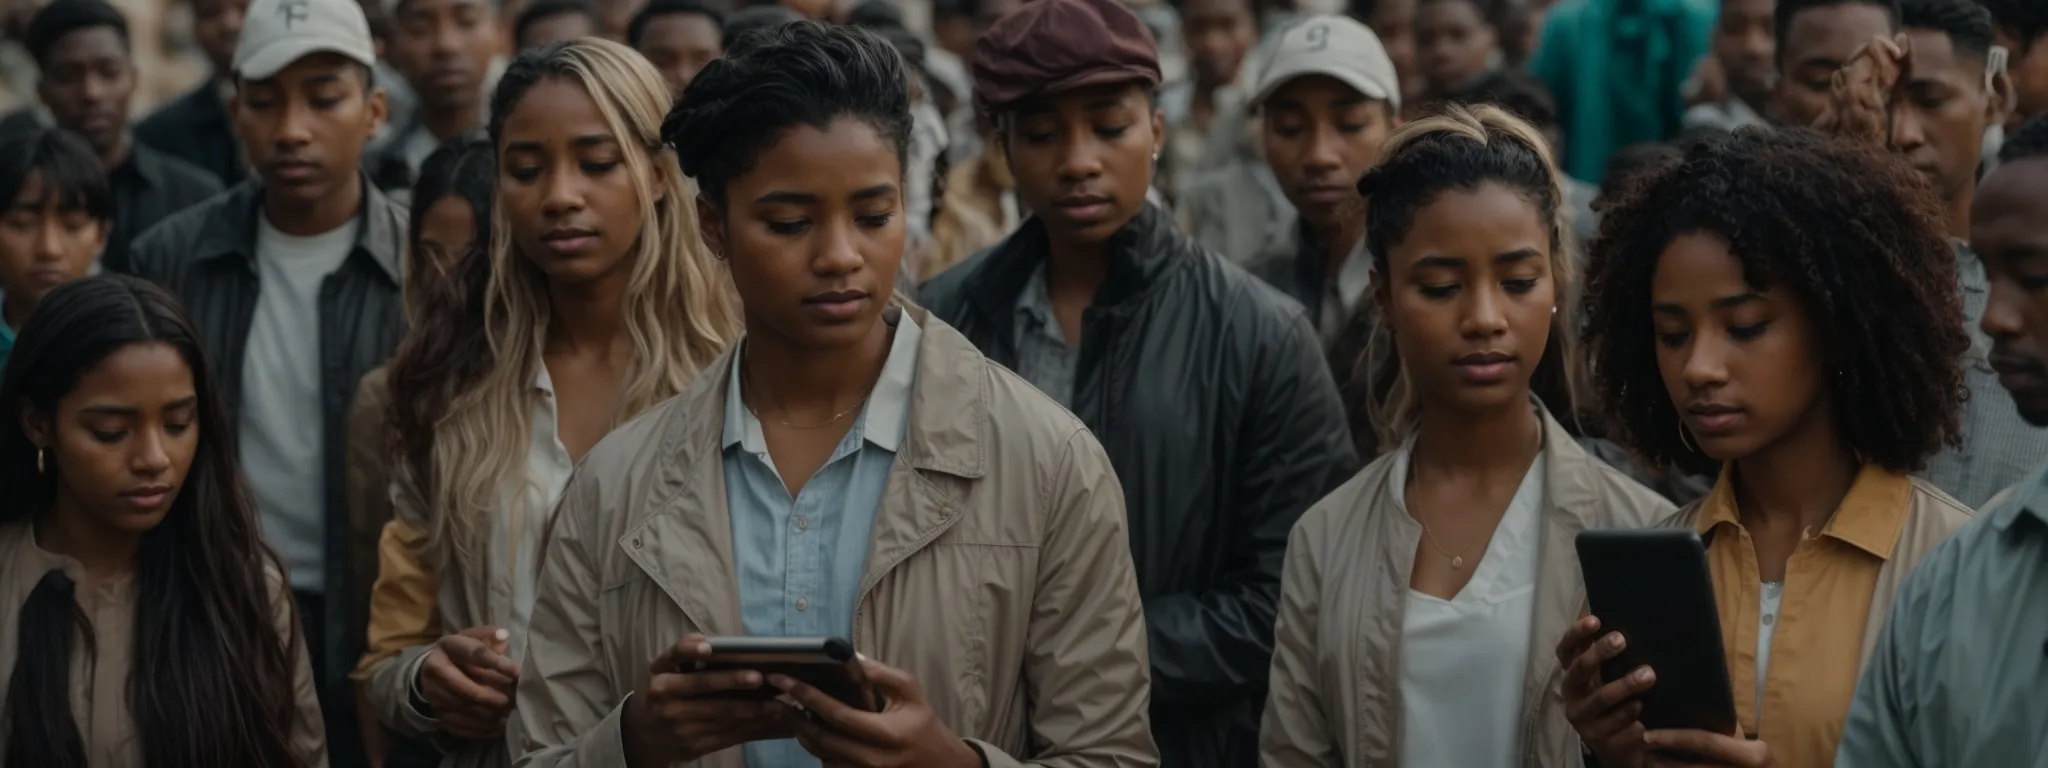 a diverse group of people stands together, each looking at a different smartphone or tablet screen, symbolizing a globally connected audience.